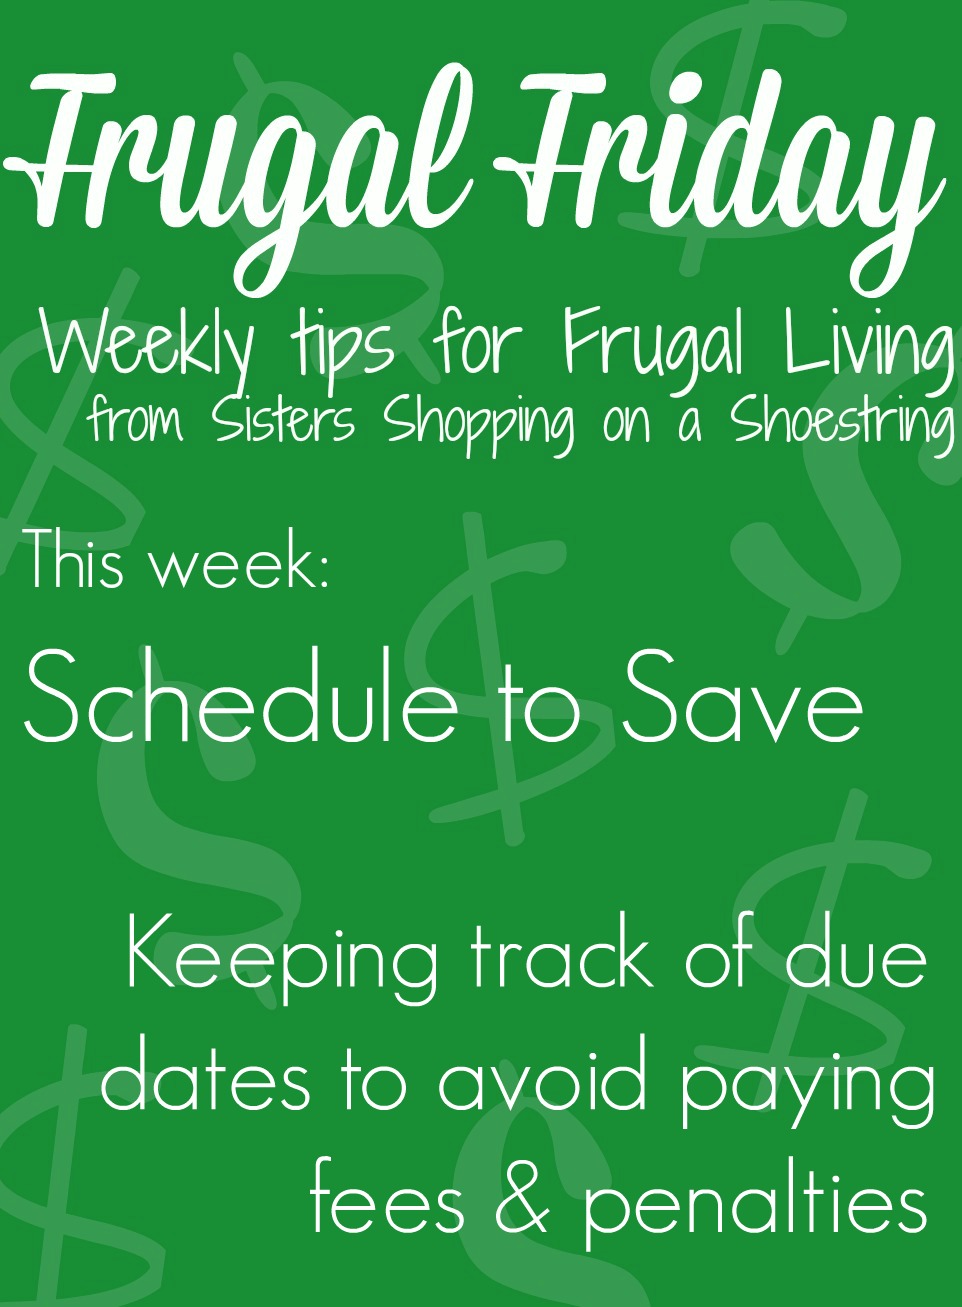 Frugal Friday schedule to save